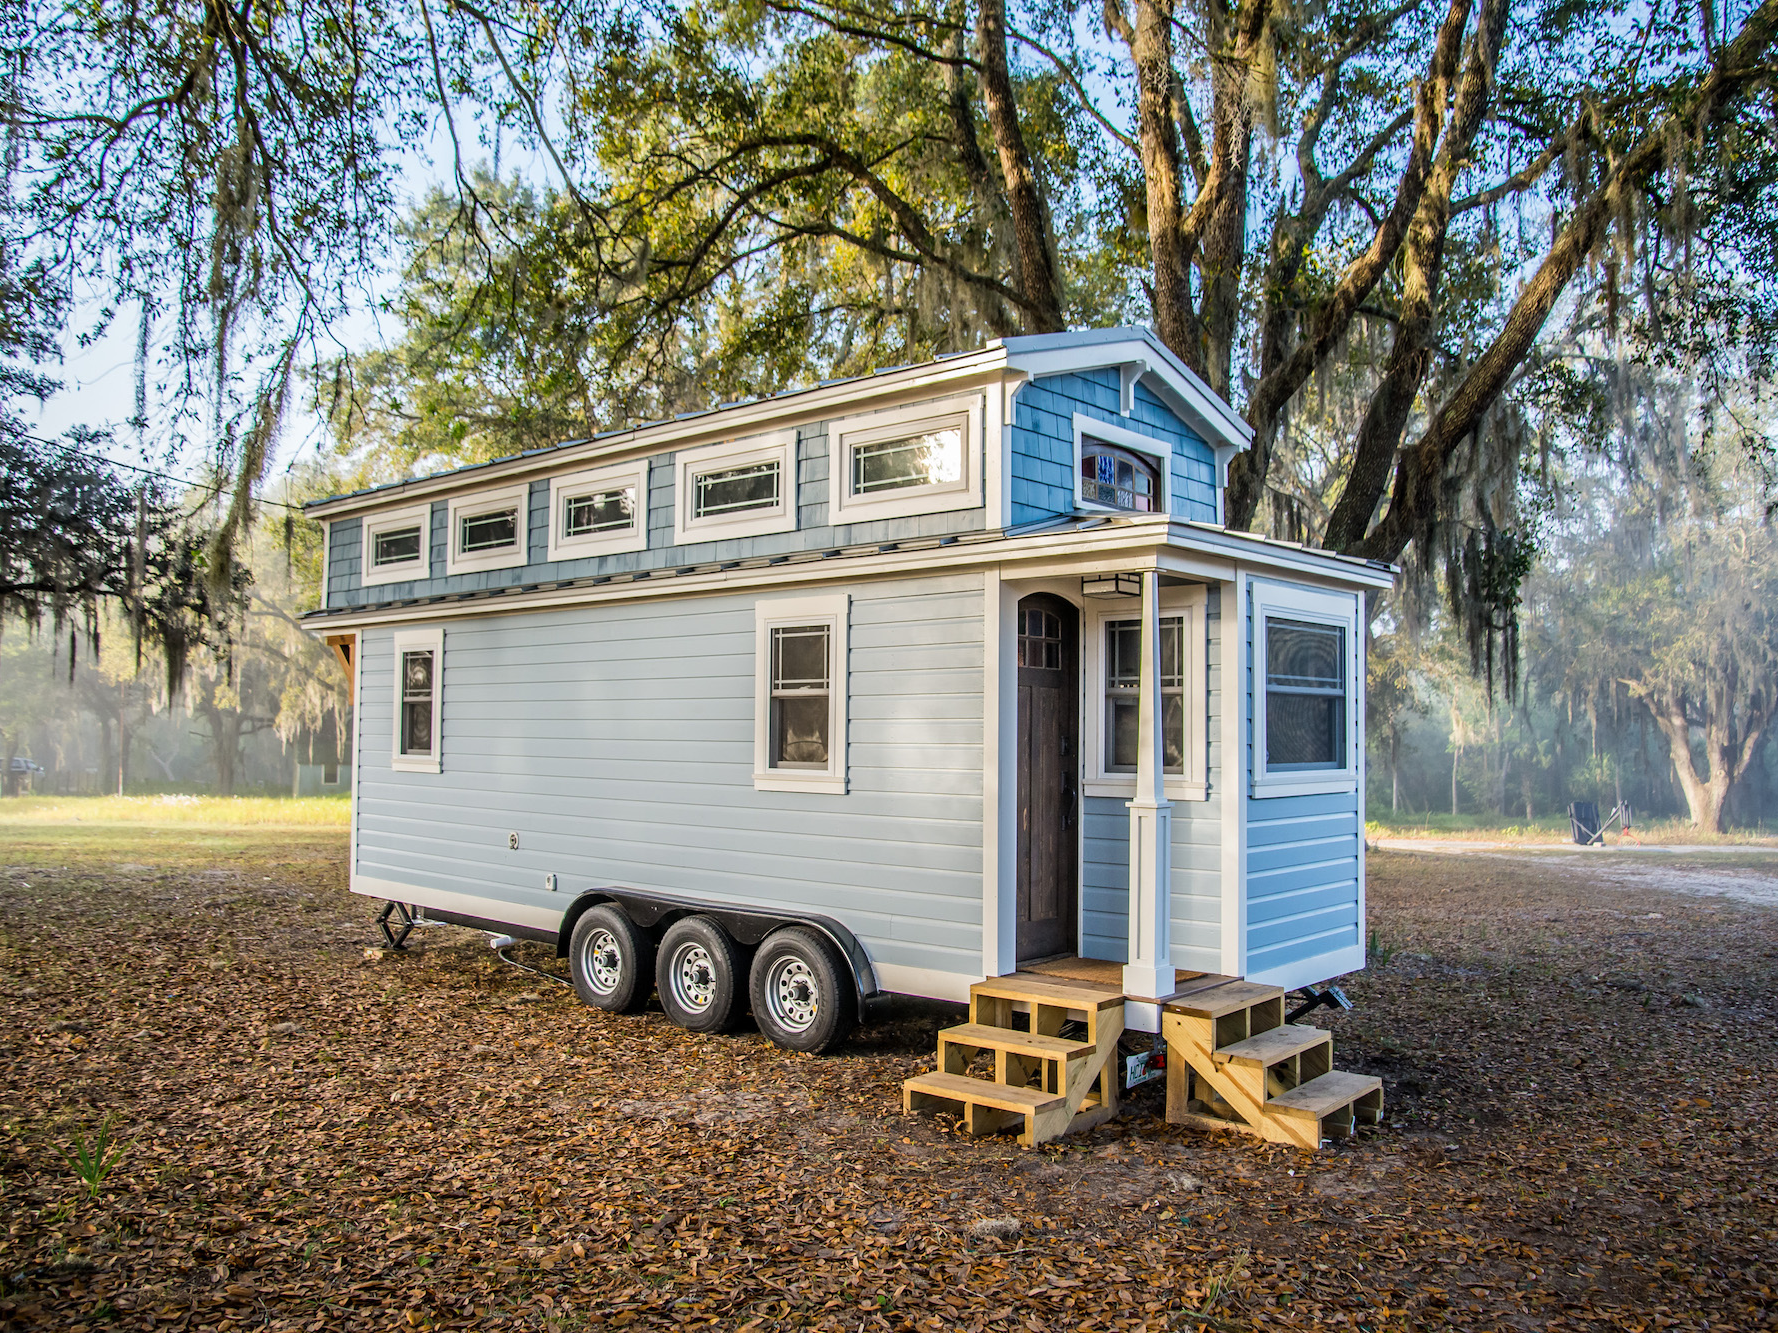 What it’s like to live in a tiny house